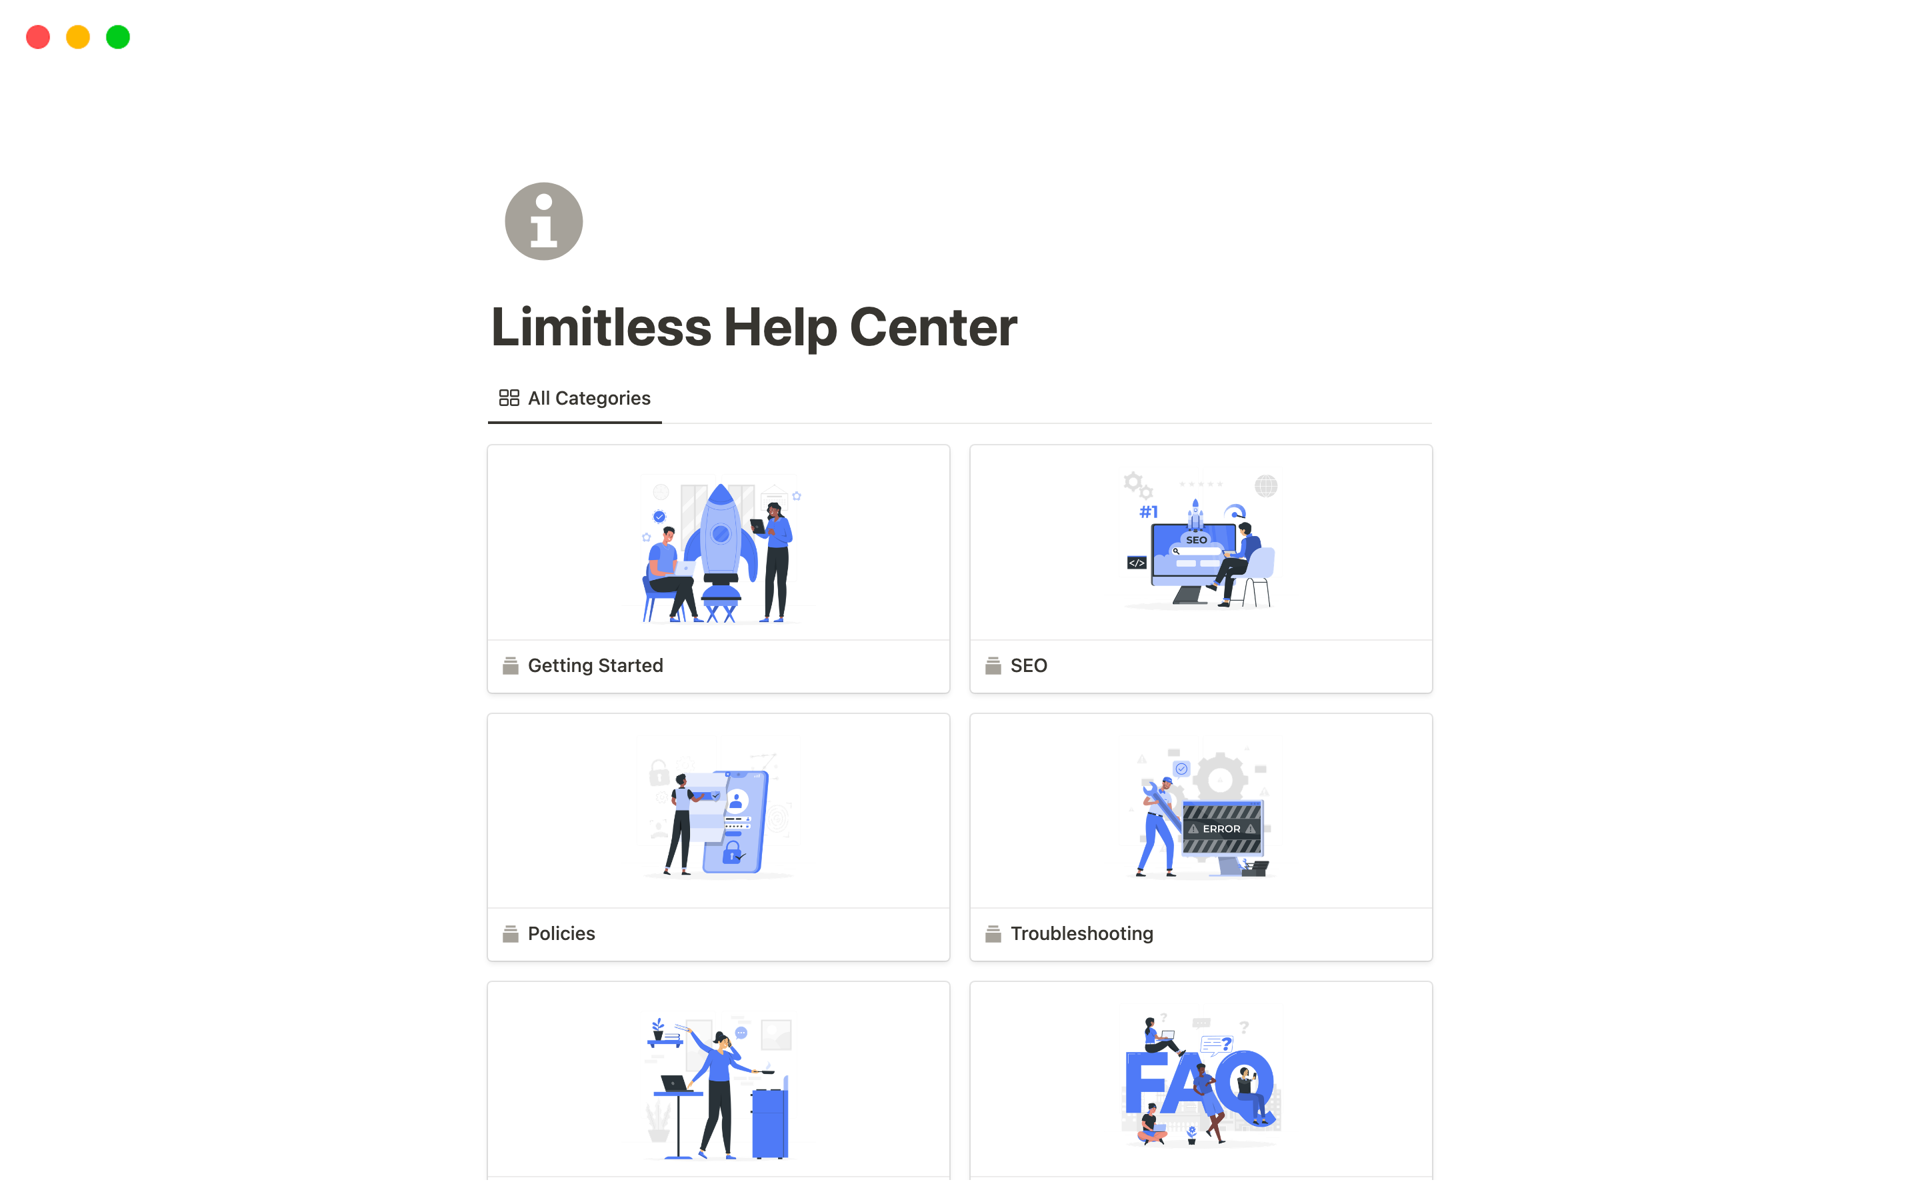 Get quick answers and in-depth resources in our Help Center with a Professional Knowledge Base, articles, FAQs, and categories.